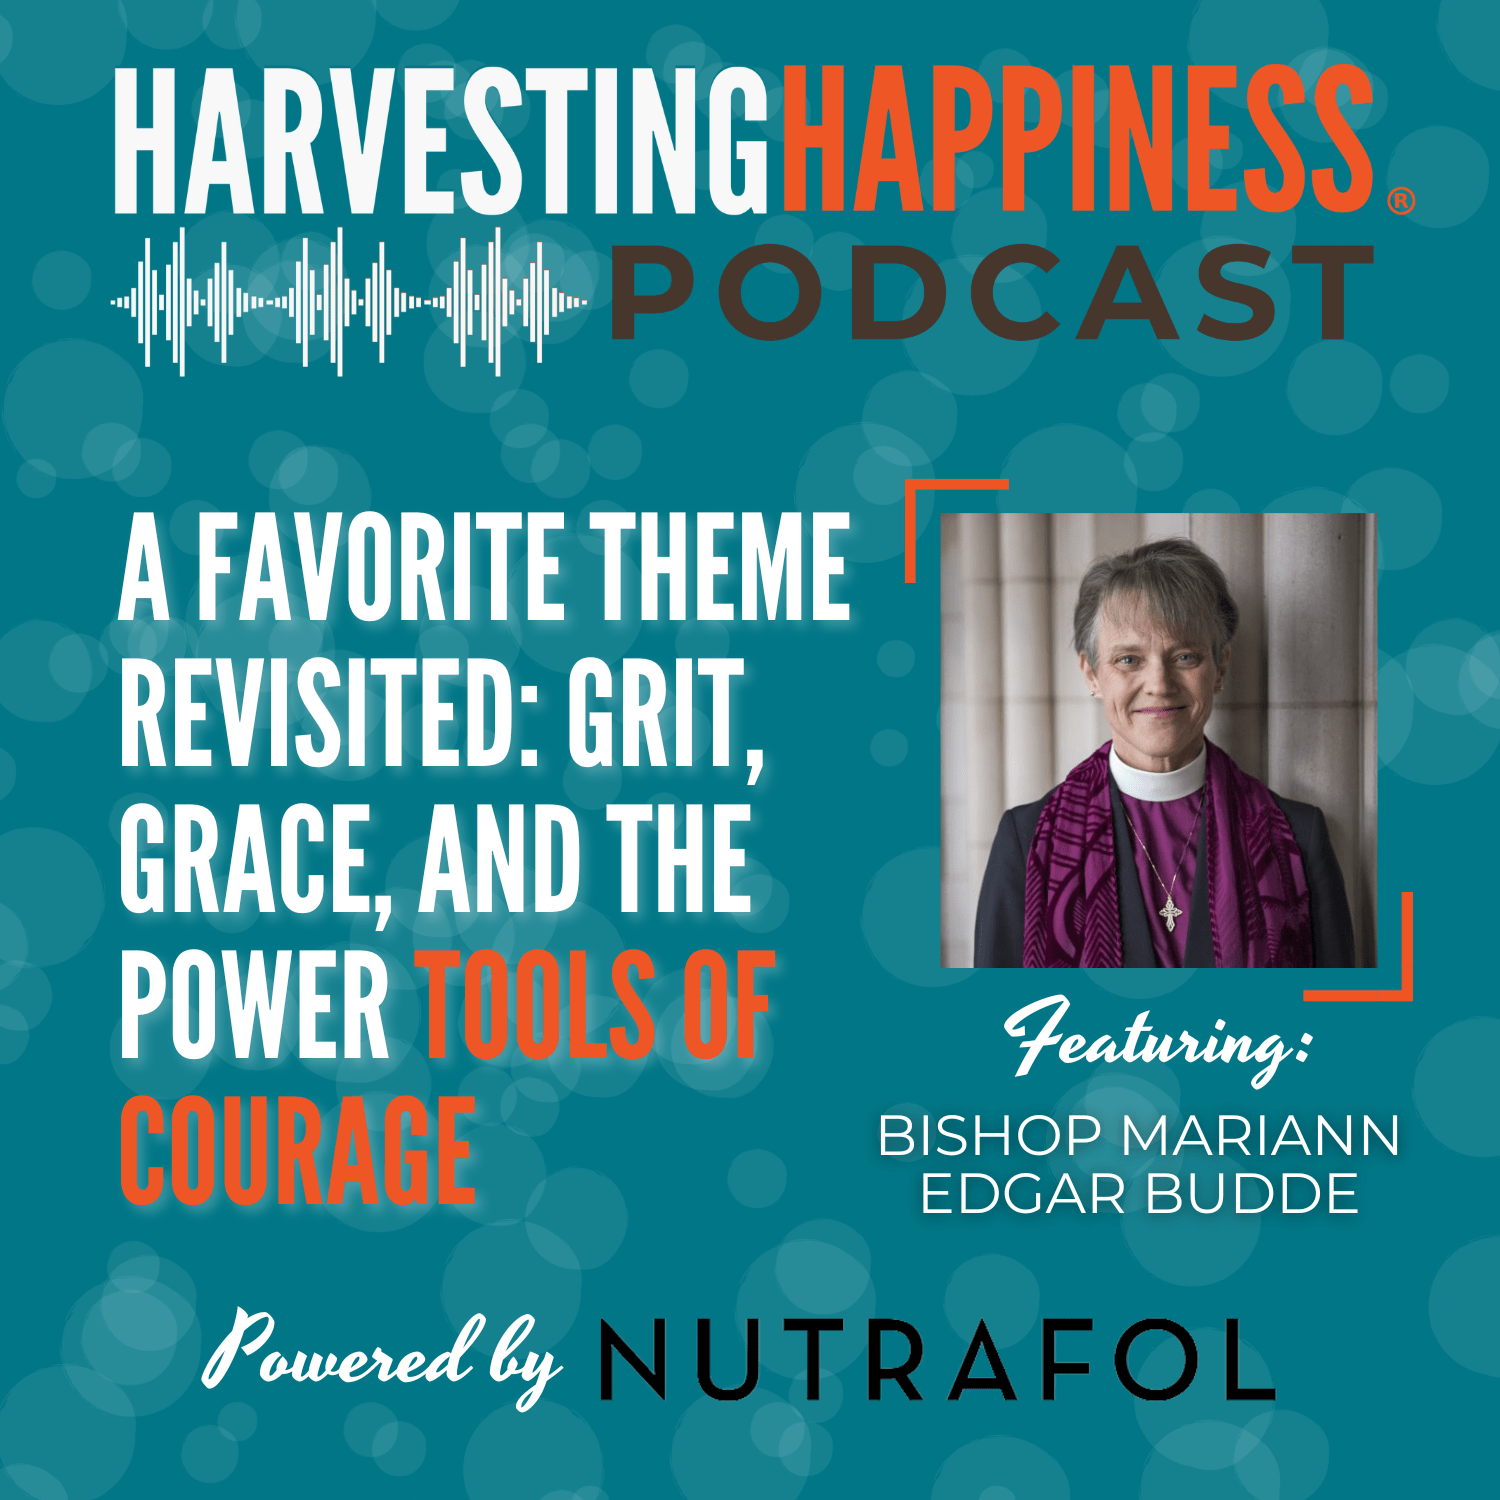 A Favorite Theme Revisited: Grit, Grace, and the Power Tools of Courage with Bishop Mariann Edgar Budde